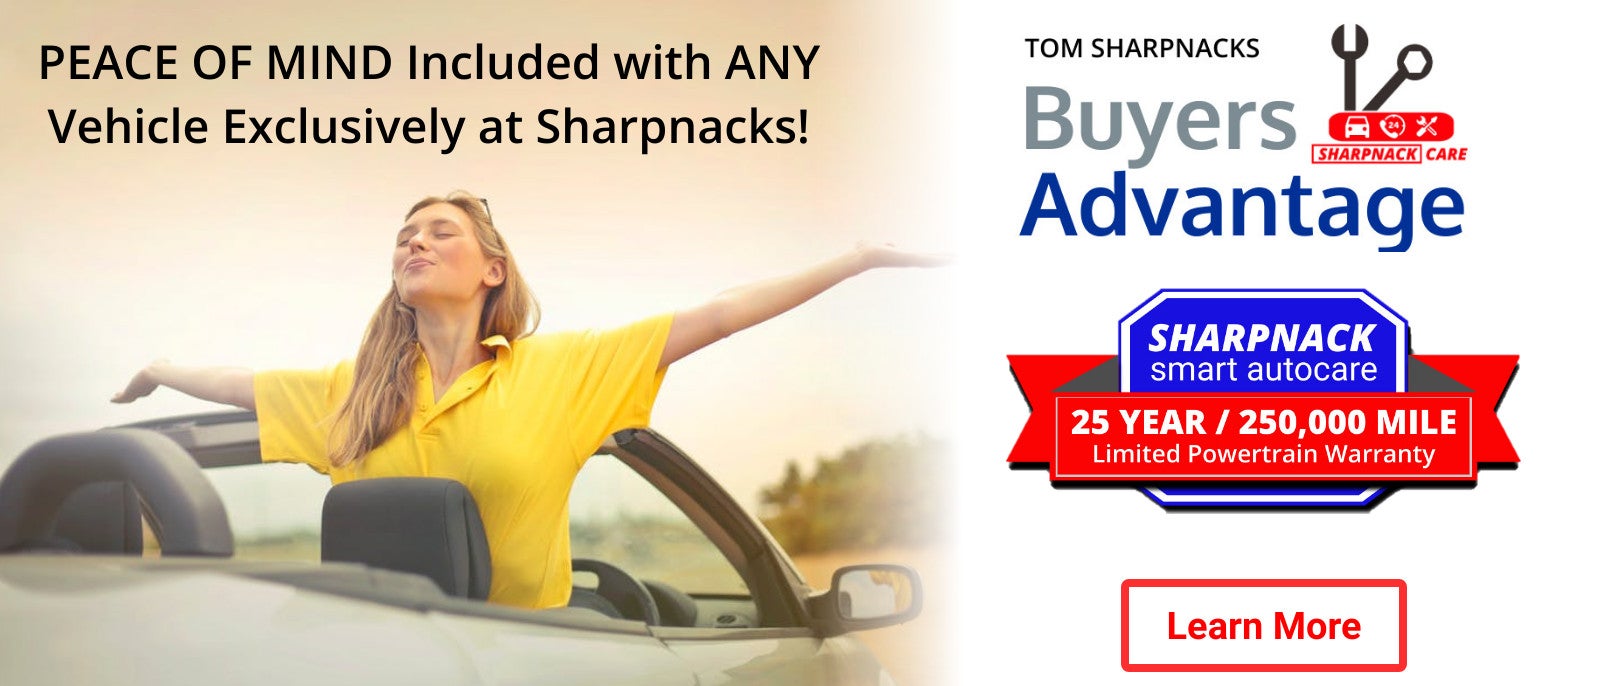 PEACE OF MIND Included with ANY vehicle Exclusively at Sharpnacks. Sharpnack Ford Buyers Advantage. Learn More.